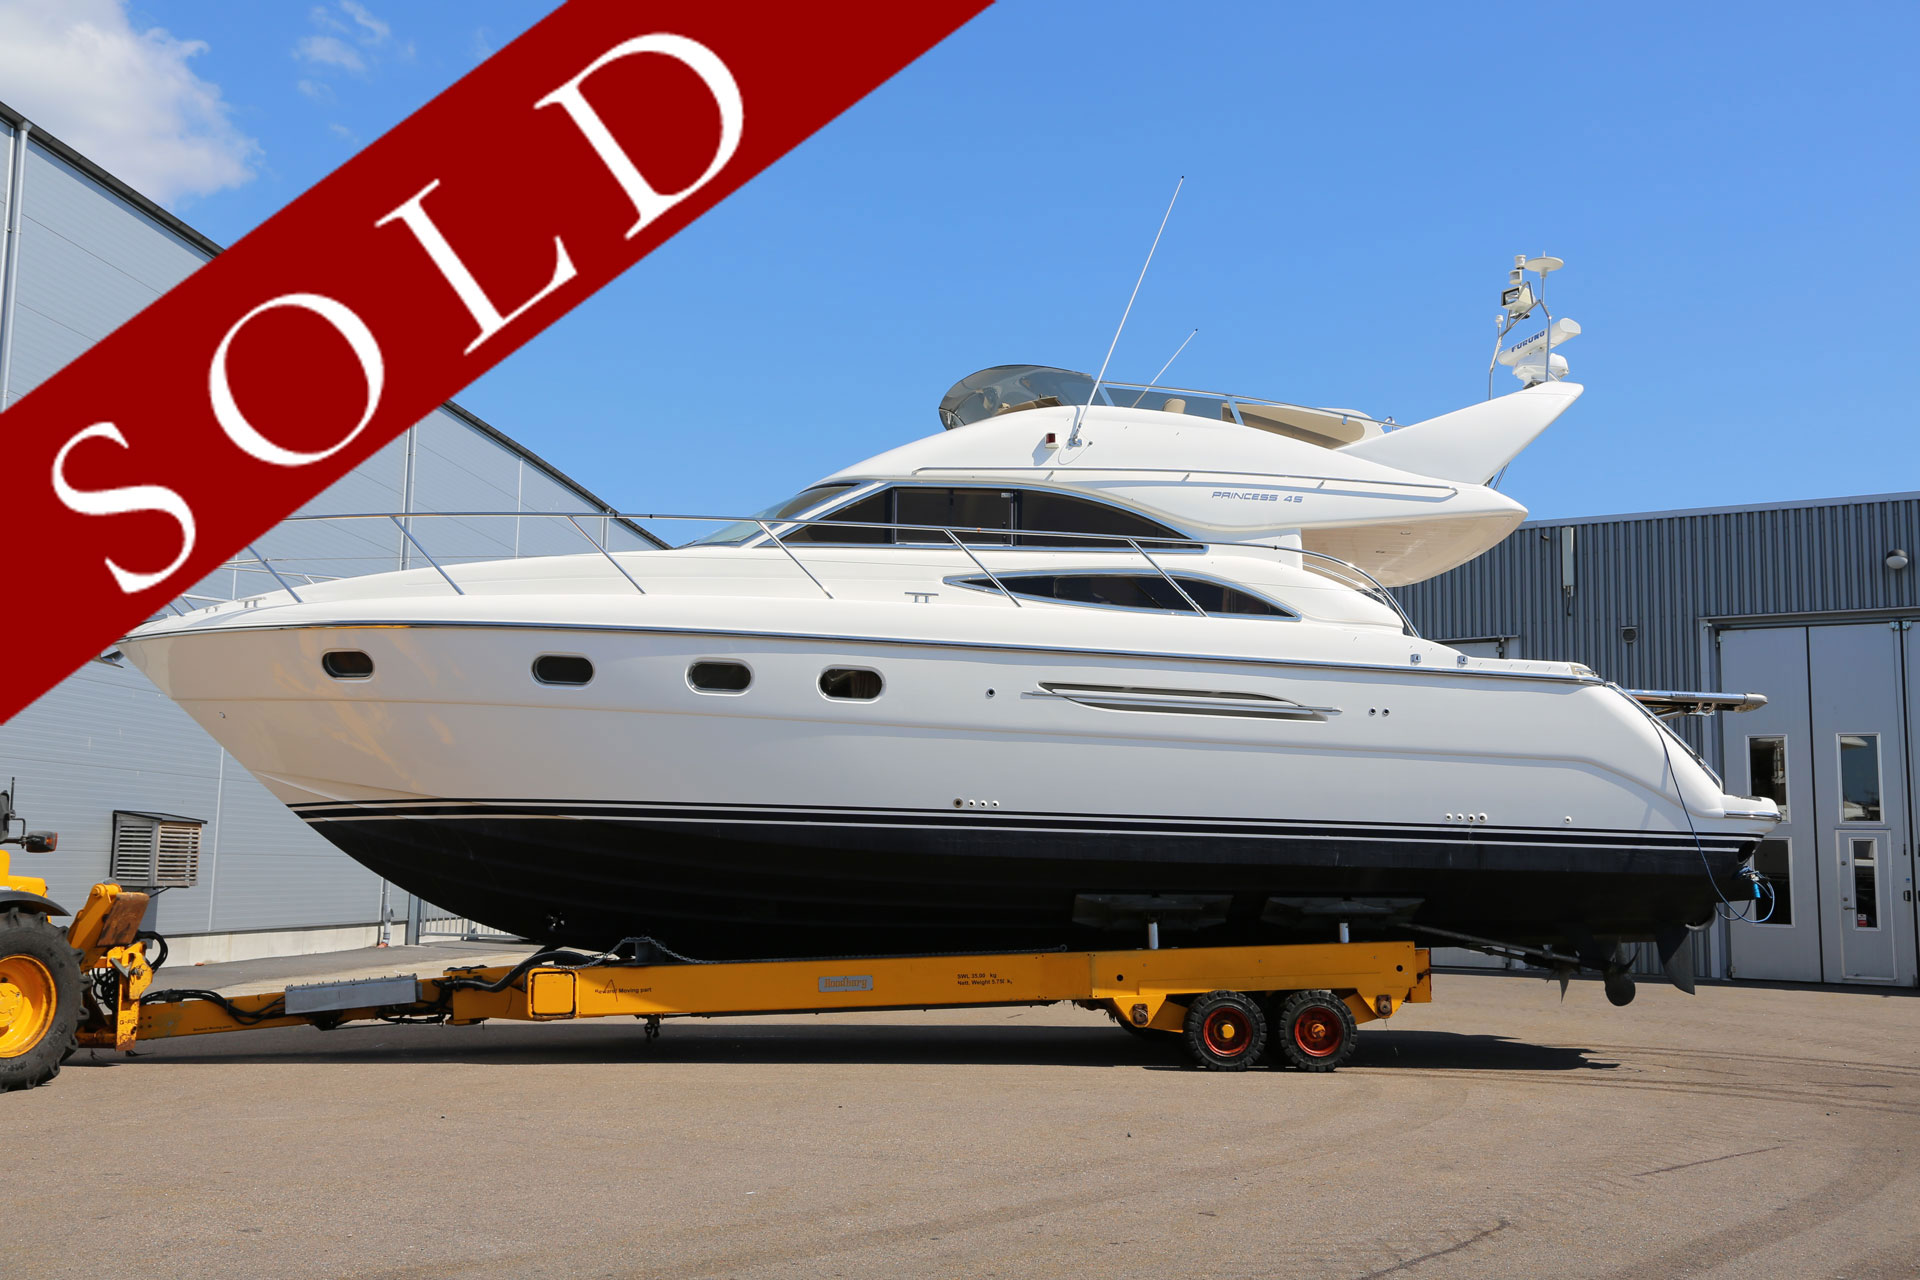 Princess 45 Flybridge sold to the east coast